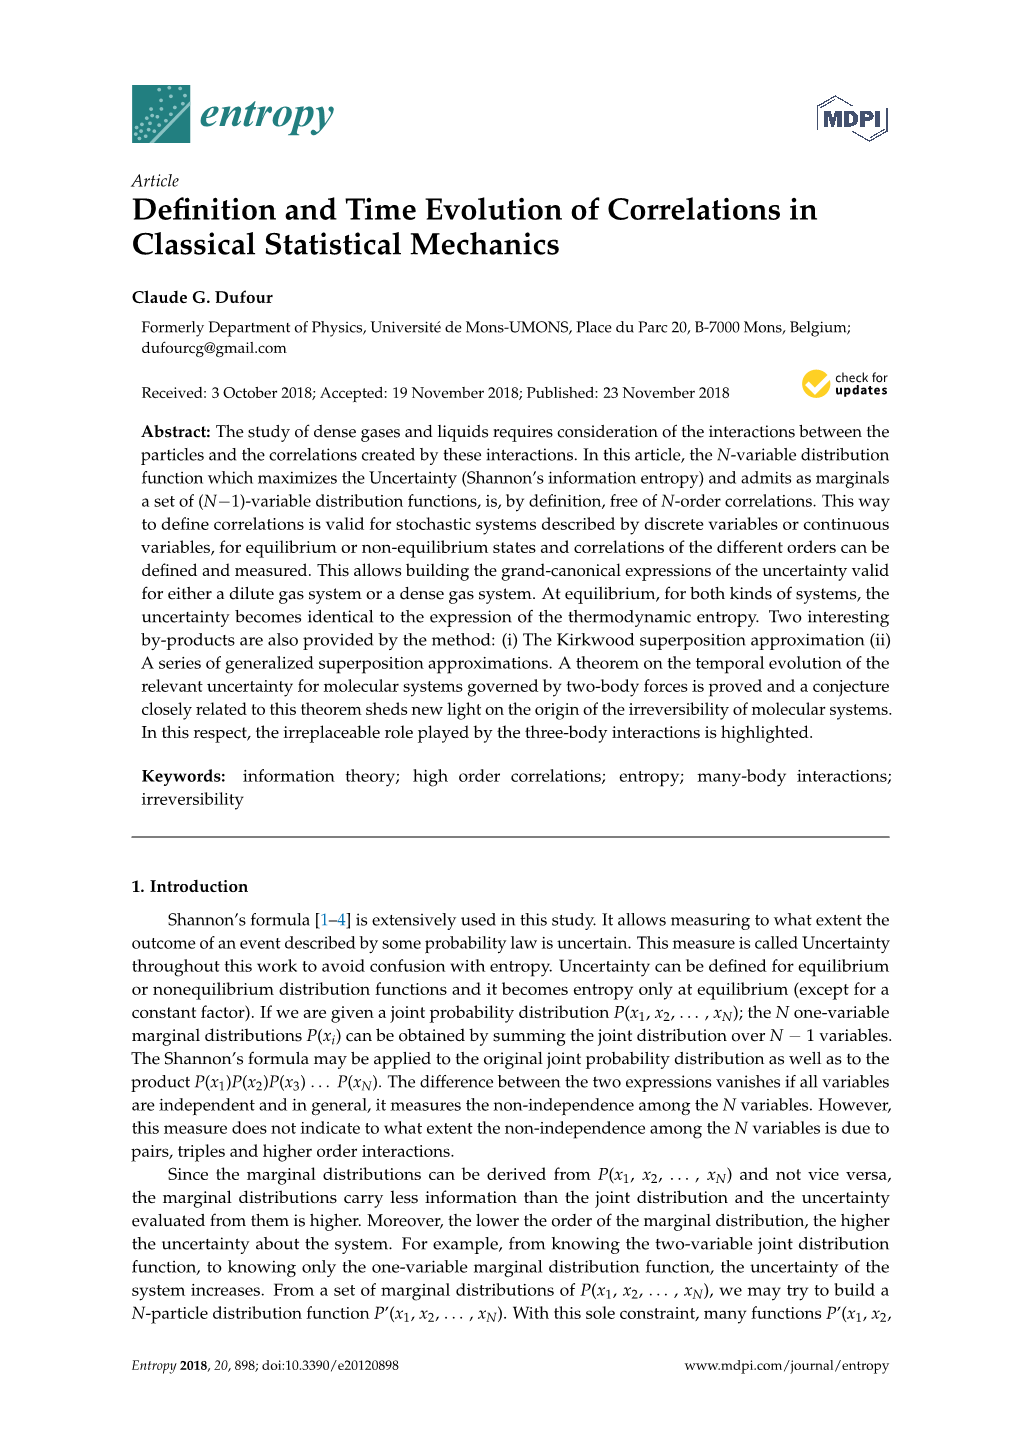 Definition and Time Evolution of Correlations in Classical Statistical